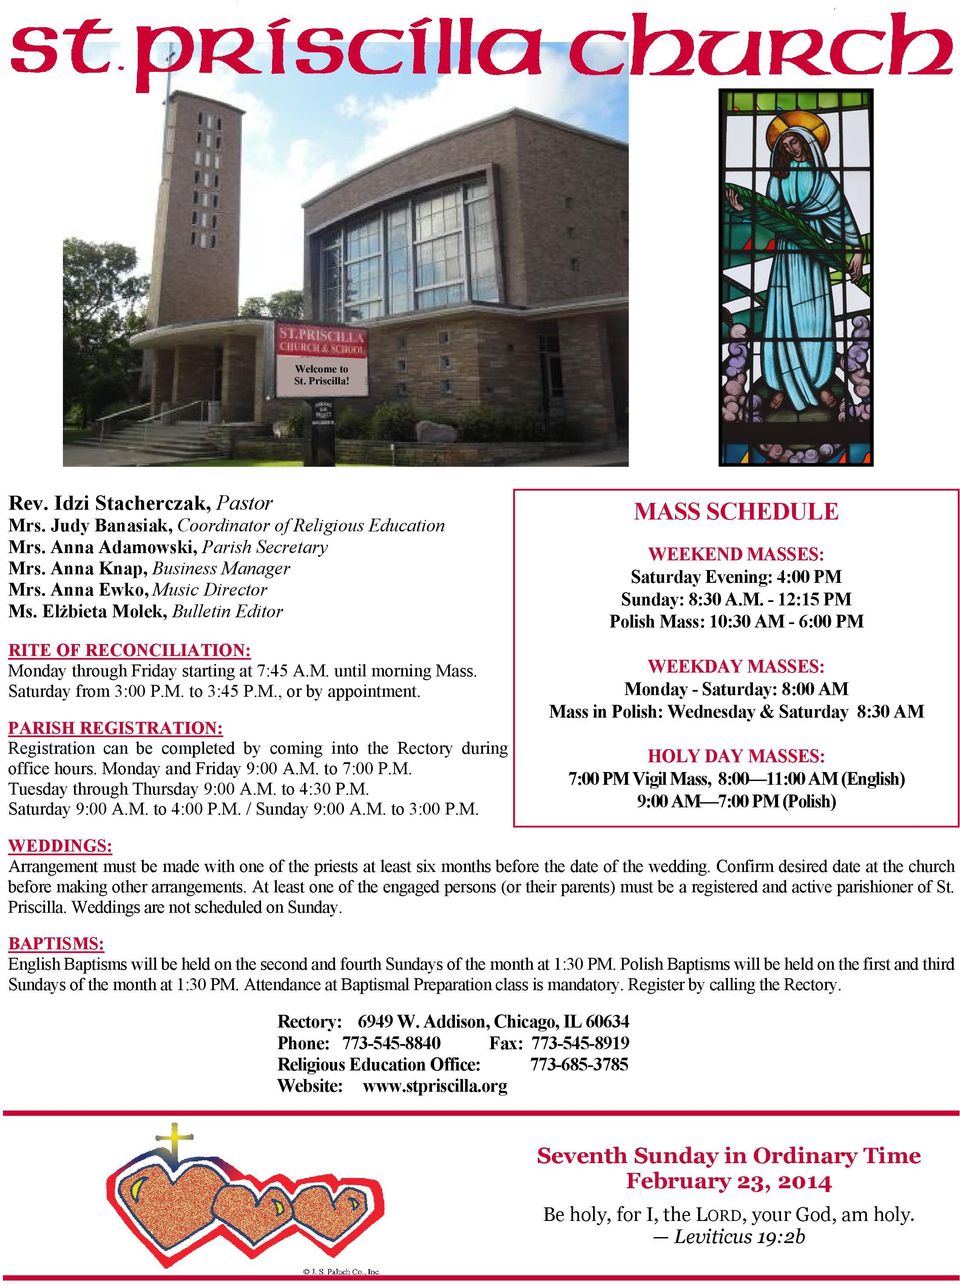 PARISH REGISTRATION: Registration can be completed by coming into the Rectory during office hours. Monday and Friday 9:00 A.M. to 7:00 P.M. Tuesday through Thursday 9:00 A.M. to 4:30 P.M. Saturday 9:00 A.